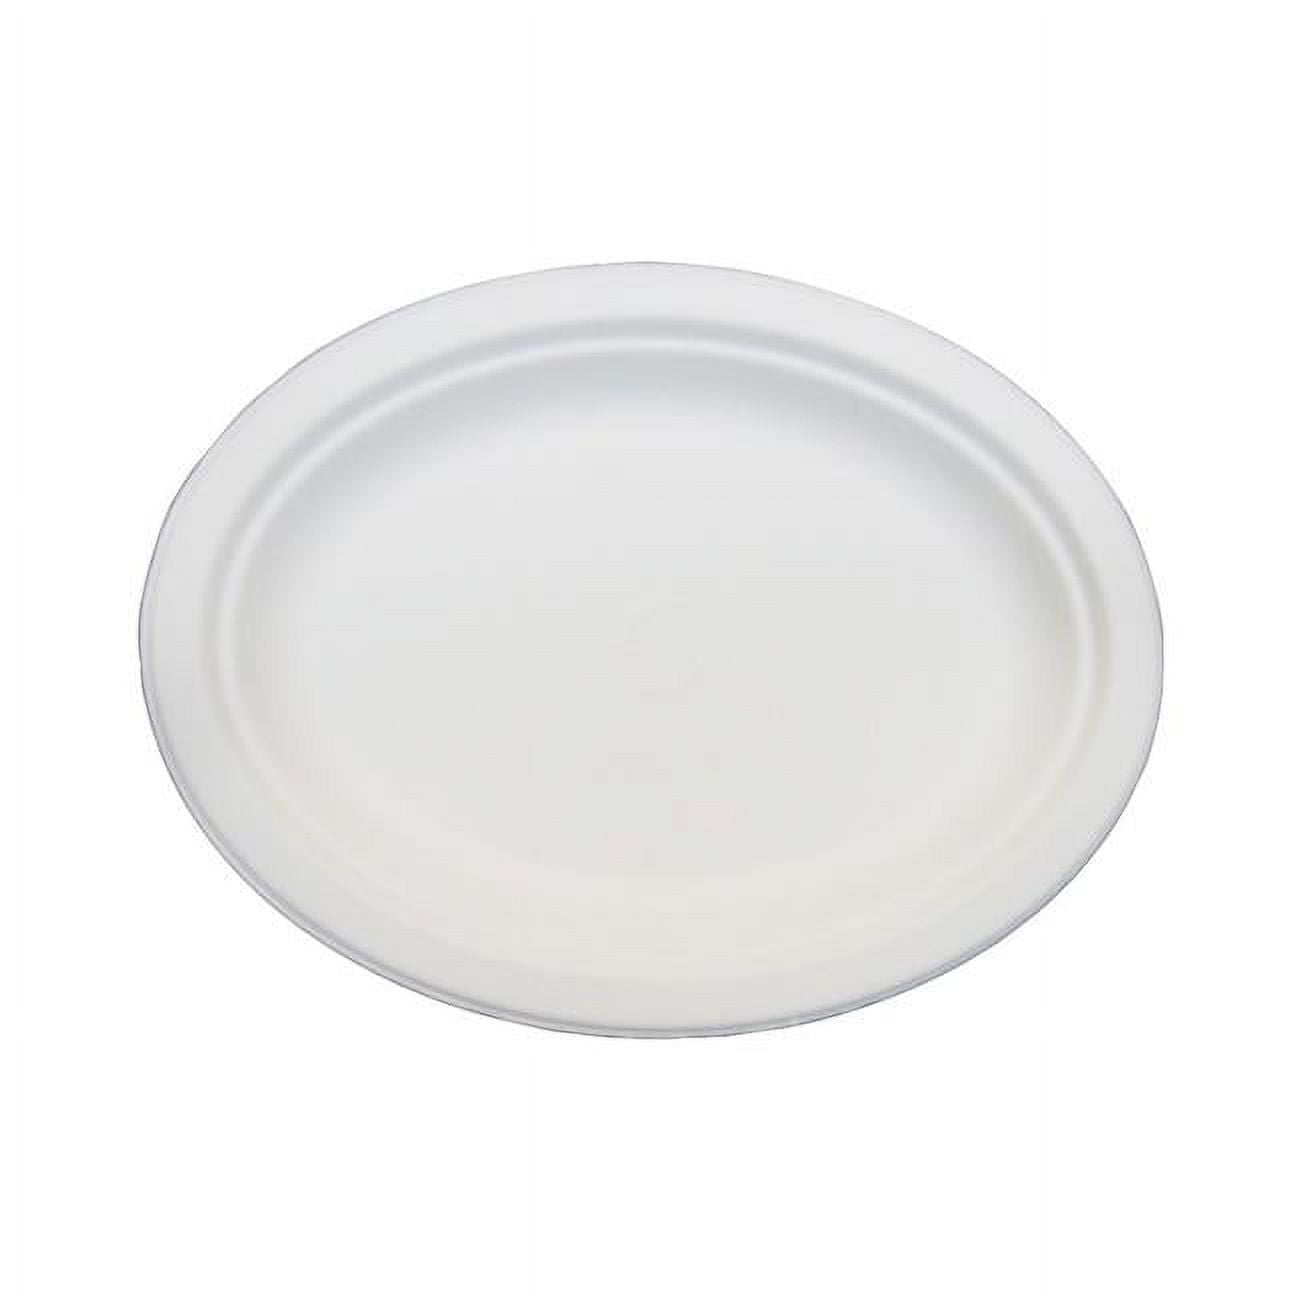 Tw-poo-012 Pe 10 X 12.5 In. Bagasse Evolution Oval Platter, White